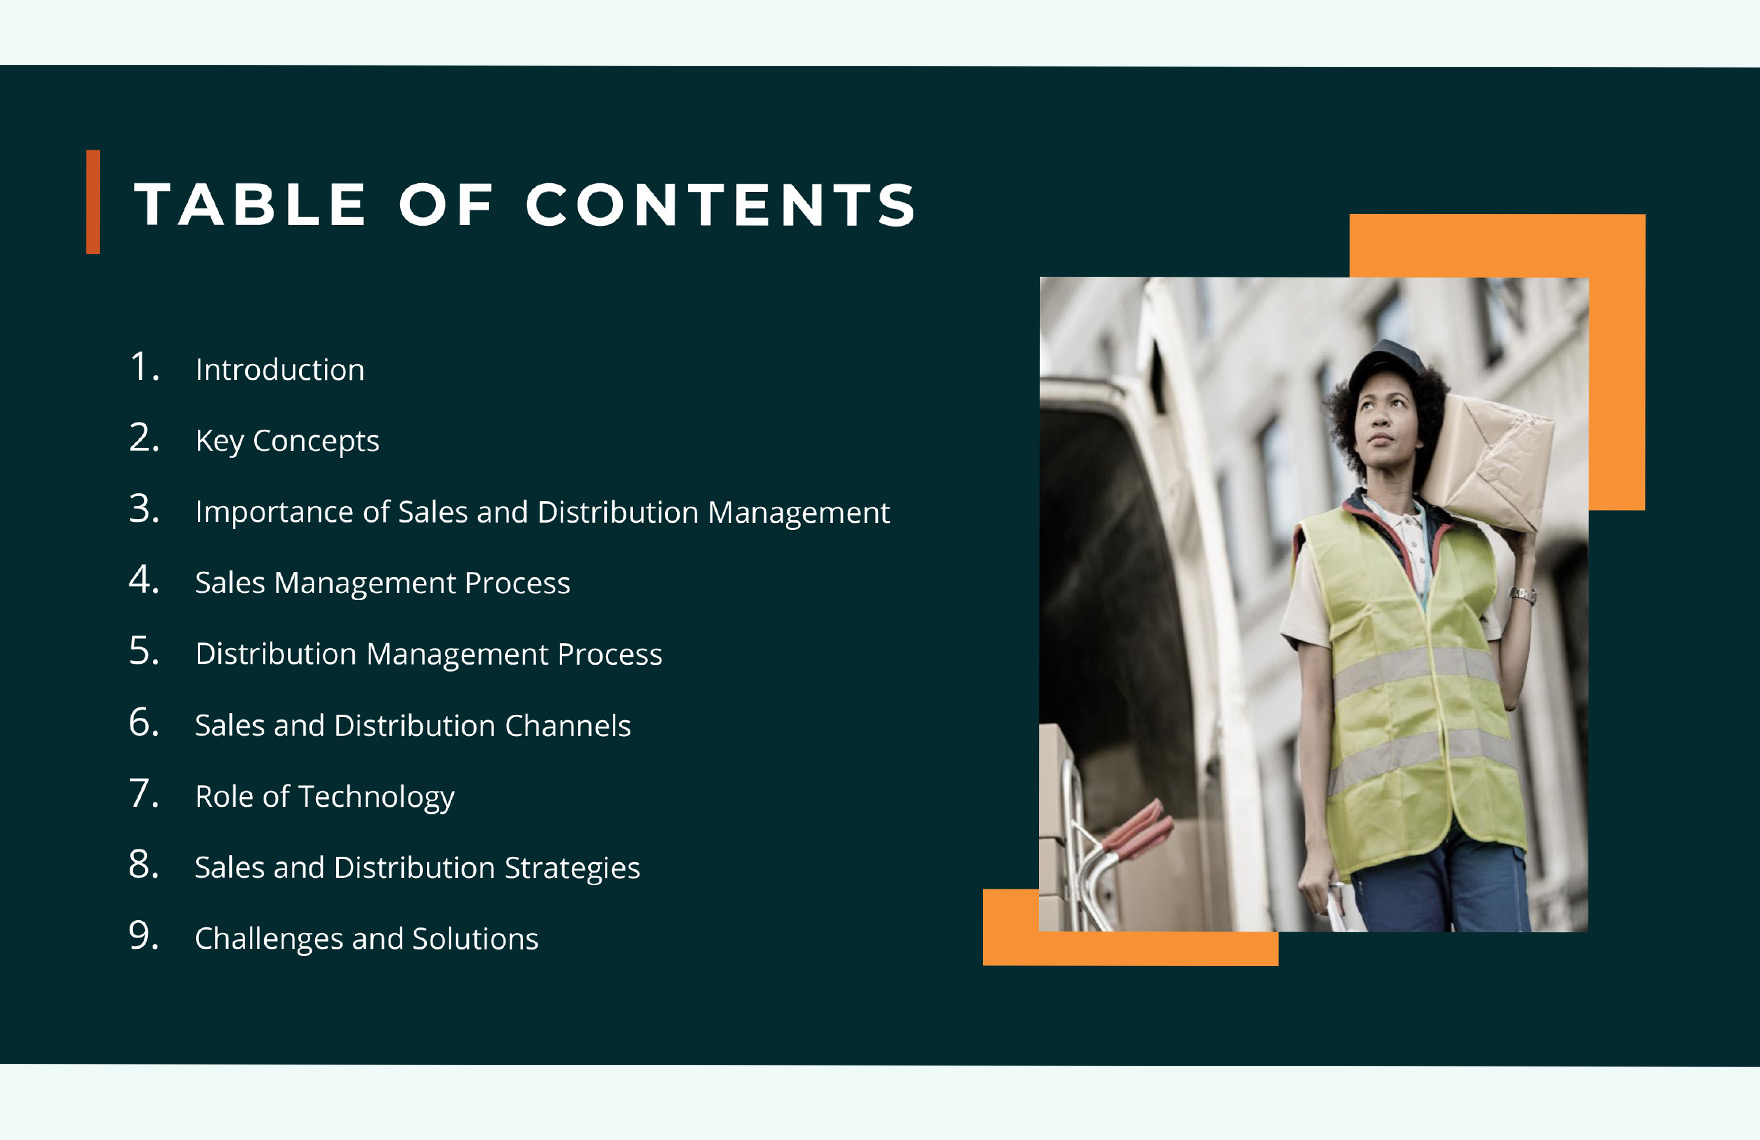 Sales and Distribution Management Template